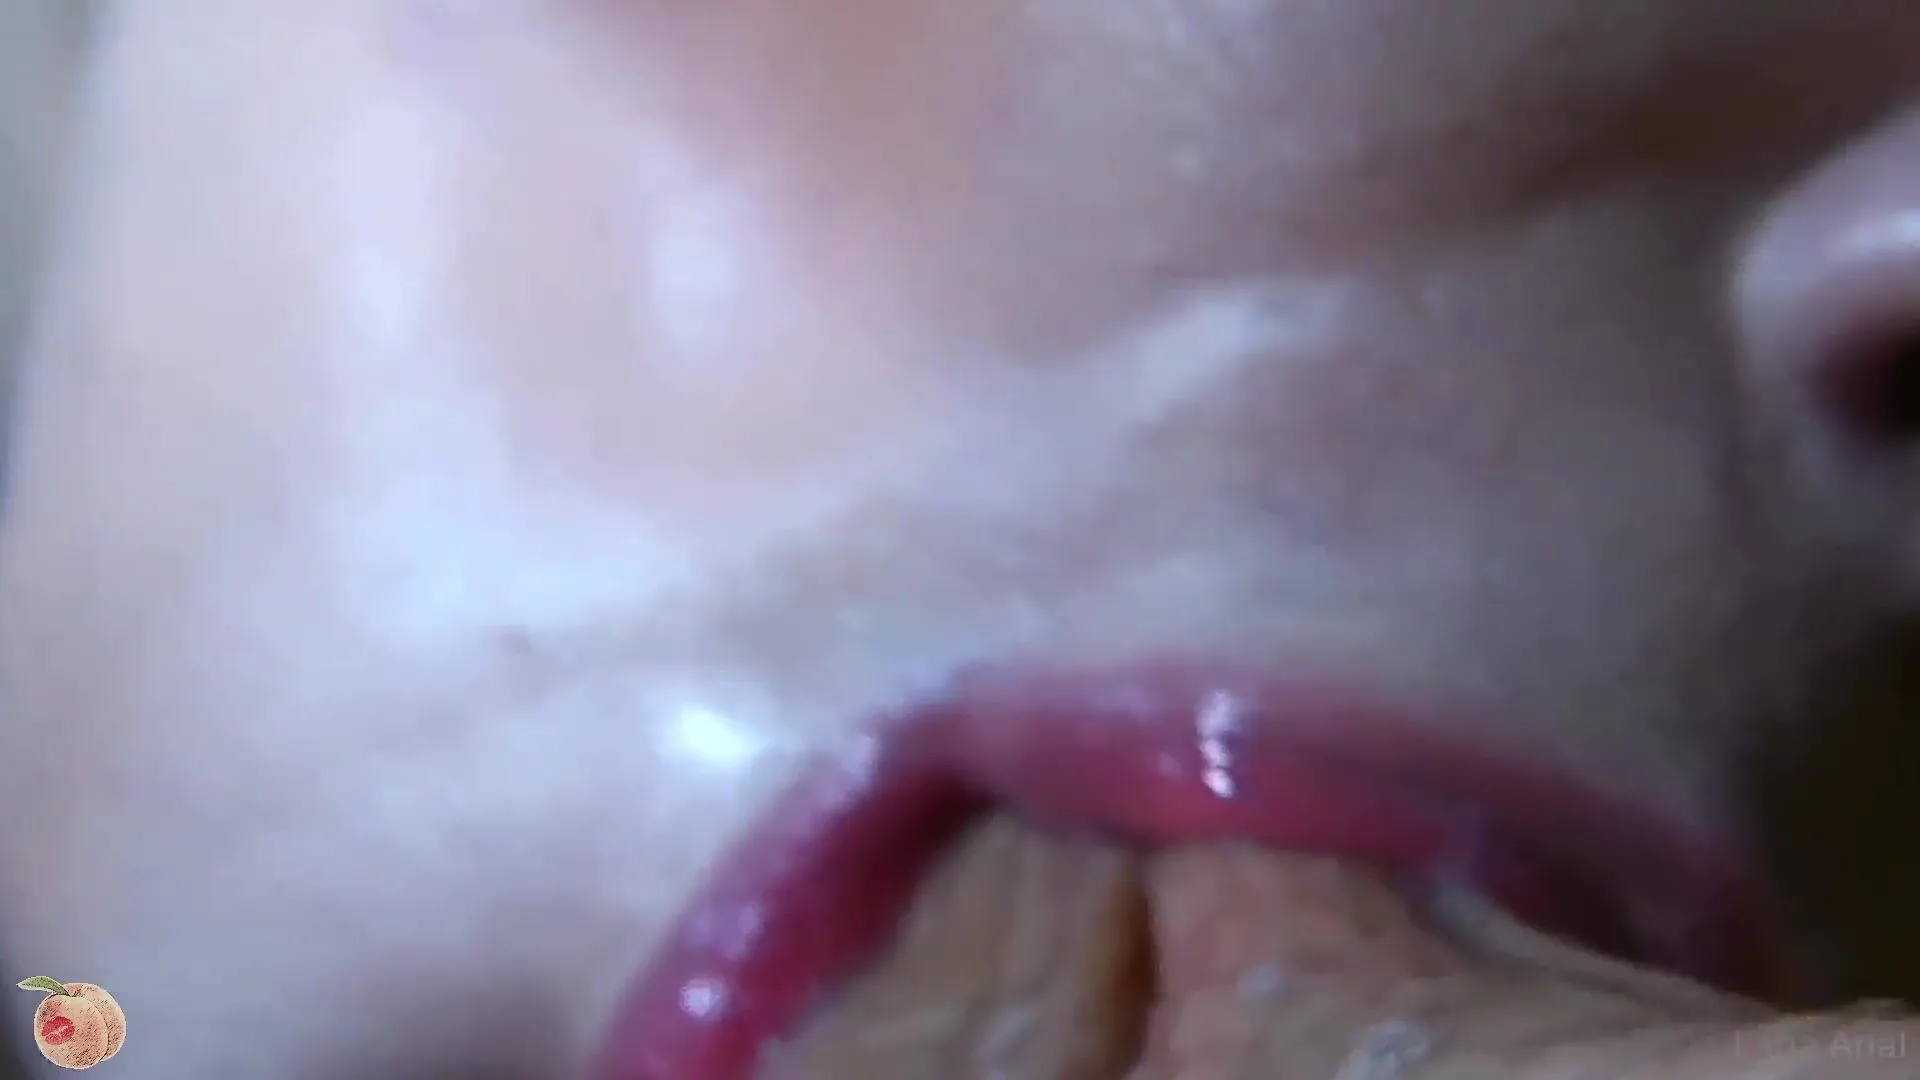 Wow Blowjob - Lanaanal4 15 05 2020 39733027 wow this super closeup blowjob is awesome  such a cool onlyfans xxx porn videos